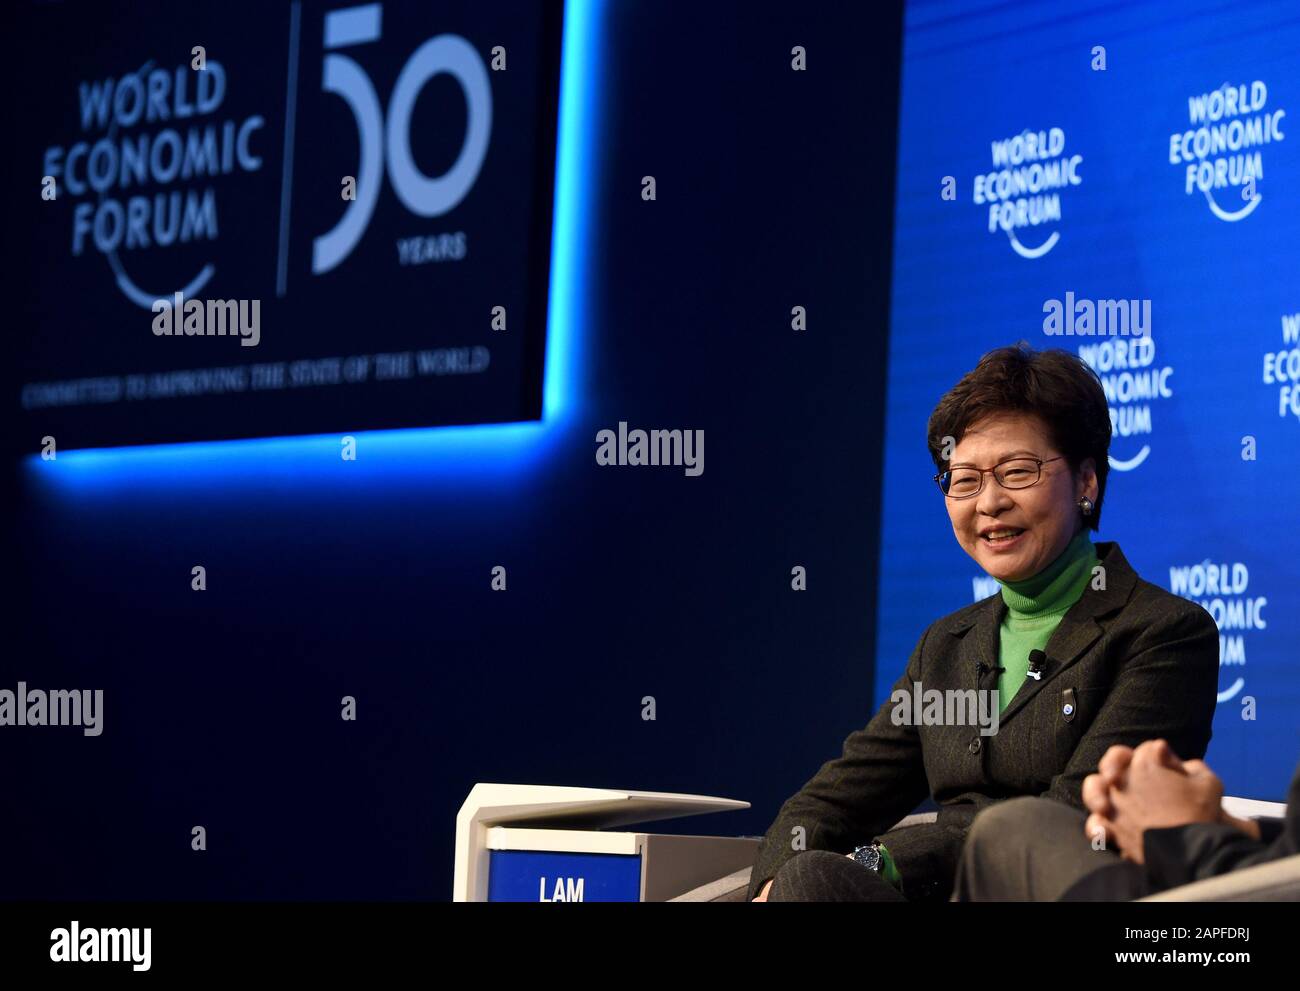 Davos, Switzerland. 22nd Jan, 2020. Chief Executive of the Hong Kong Special Administrative Region (HKSAR) Carrie Lam attends the annual meeting of the World Economic Forum in Davos, Switzerland, Jan. 22, 2020. Carrie Lam on Wednesday highlighted the importance of understanding accurately and implementing fully the 'one country, two systems' principle, as well as upholding the rule of law, to the future of Hong Kong. Credit: Guo Chen/Xinhua/Alamy Live News Stock Photo